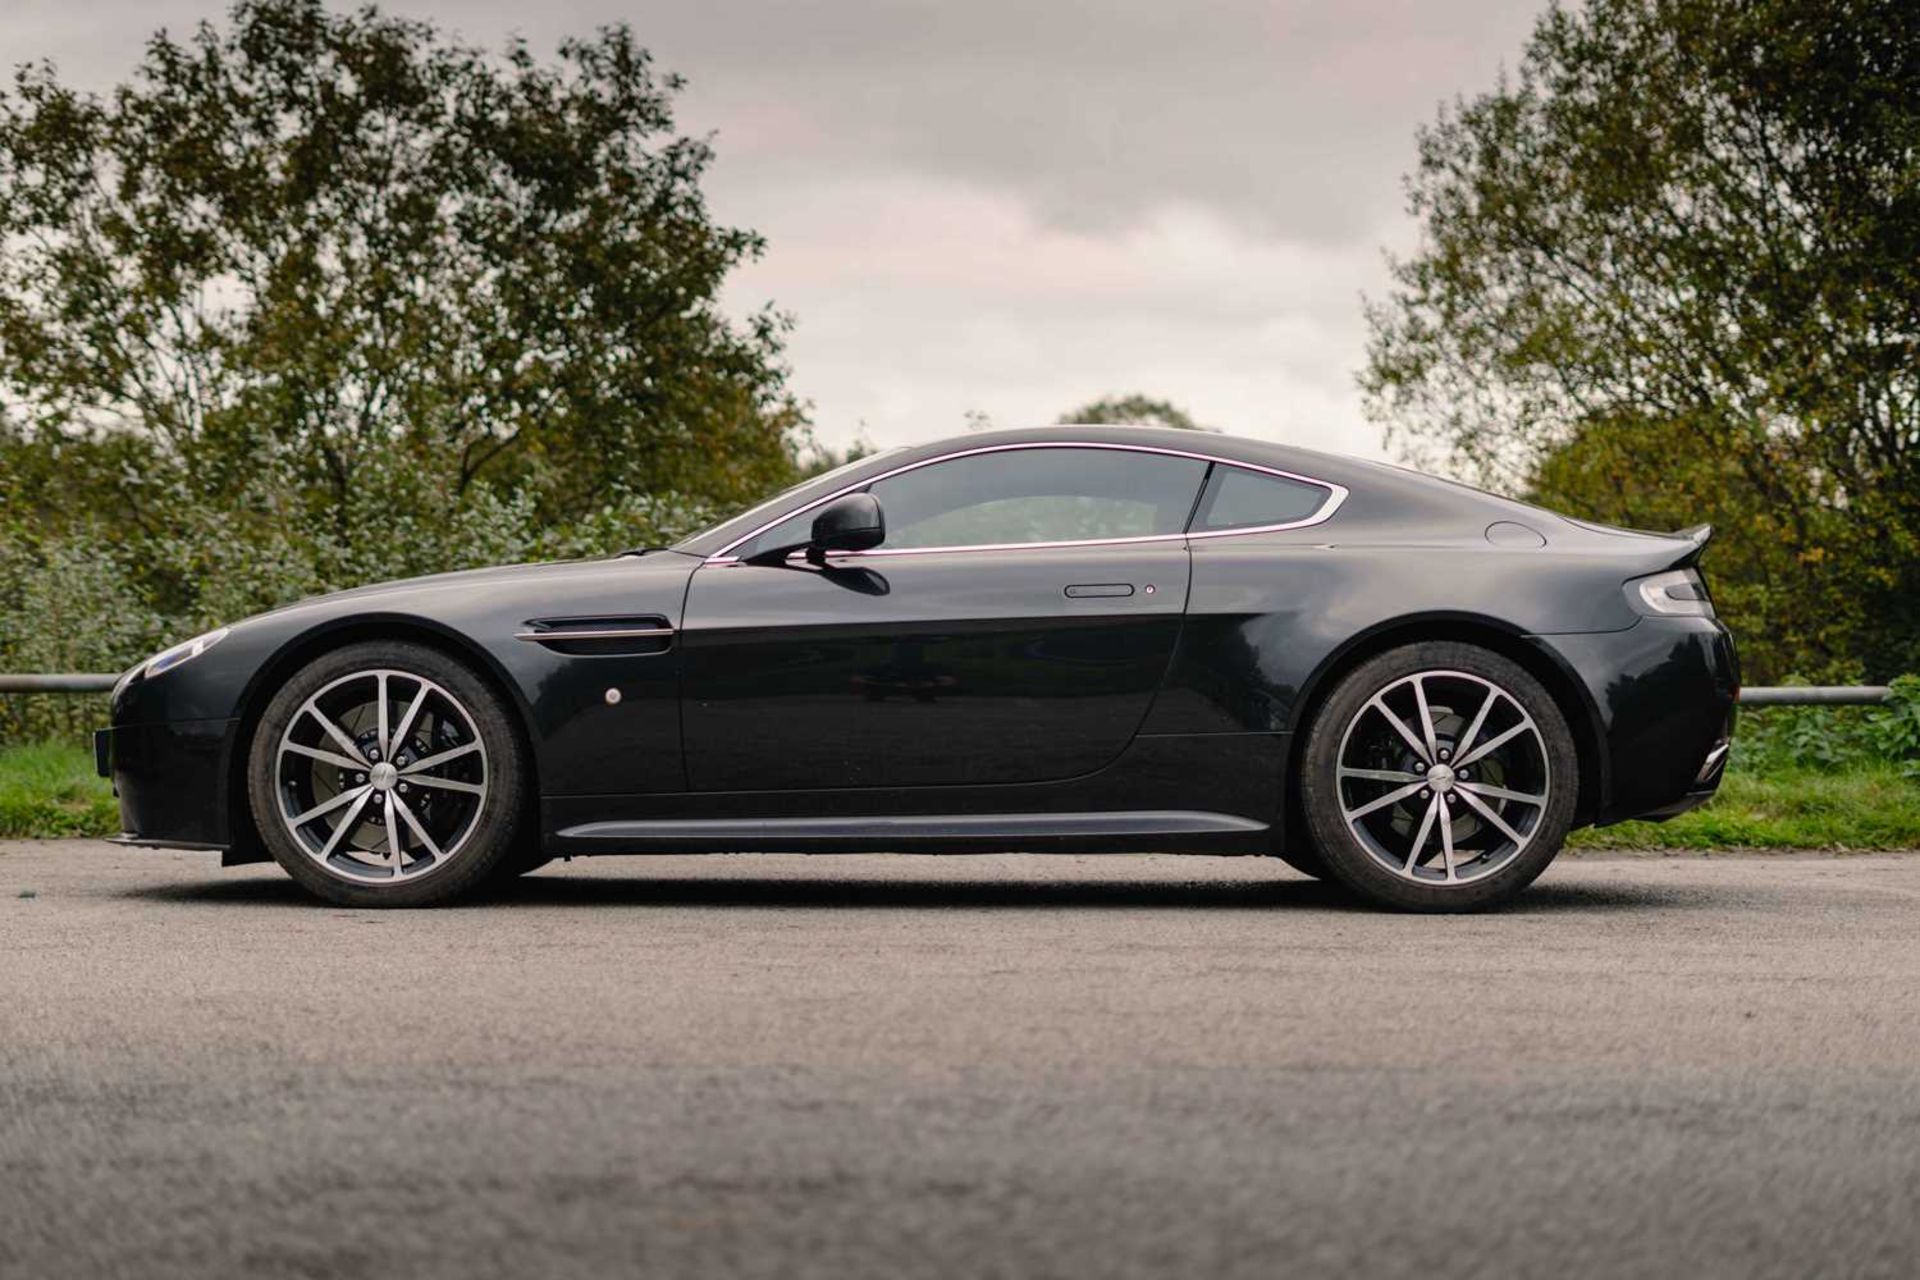 2013 Aston Martin Vantage S SP10 Warranted 15,600 miles from new - Image 6 of 60